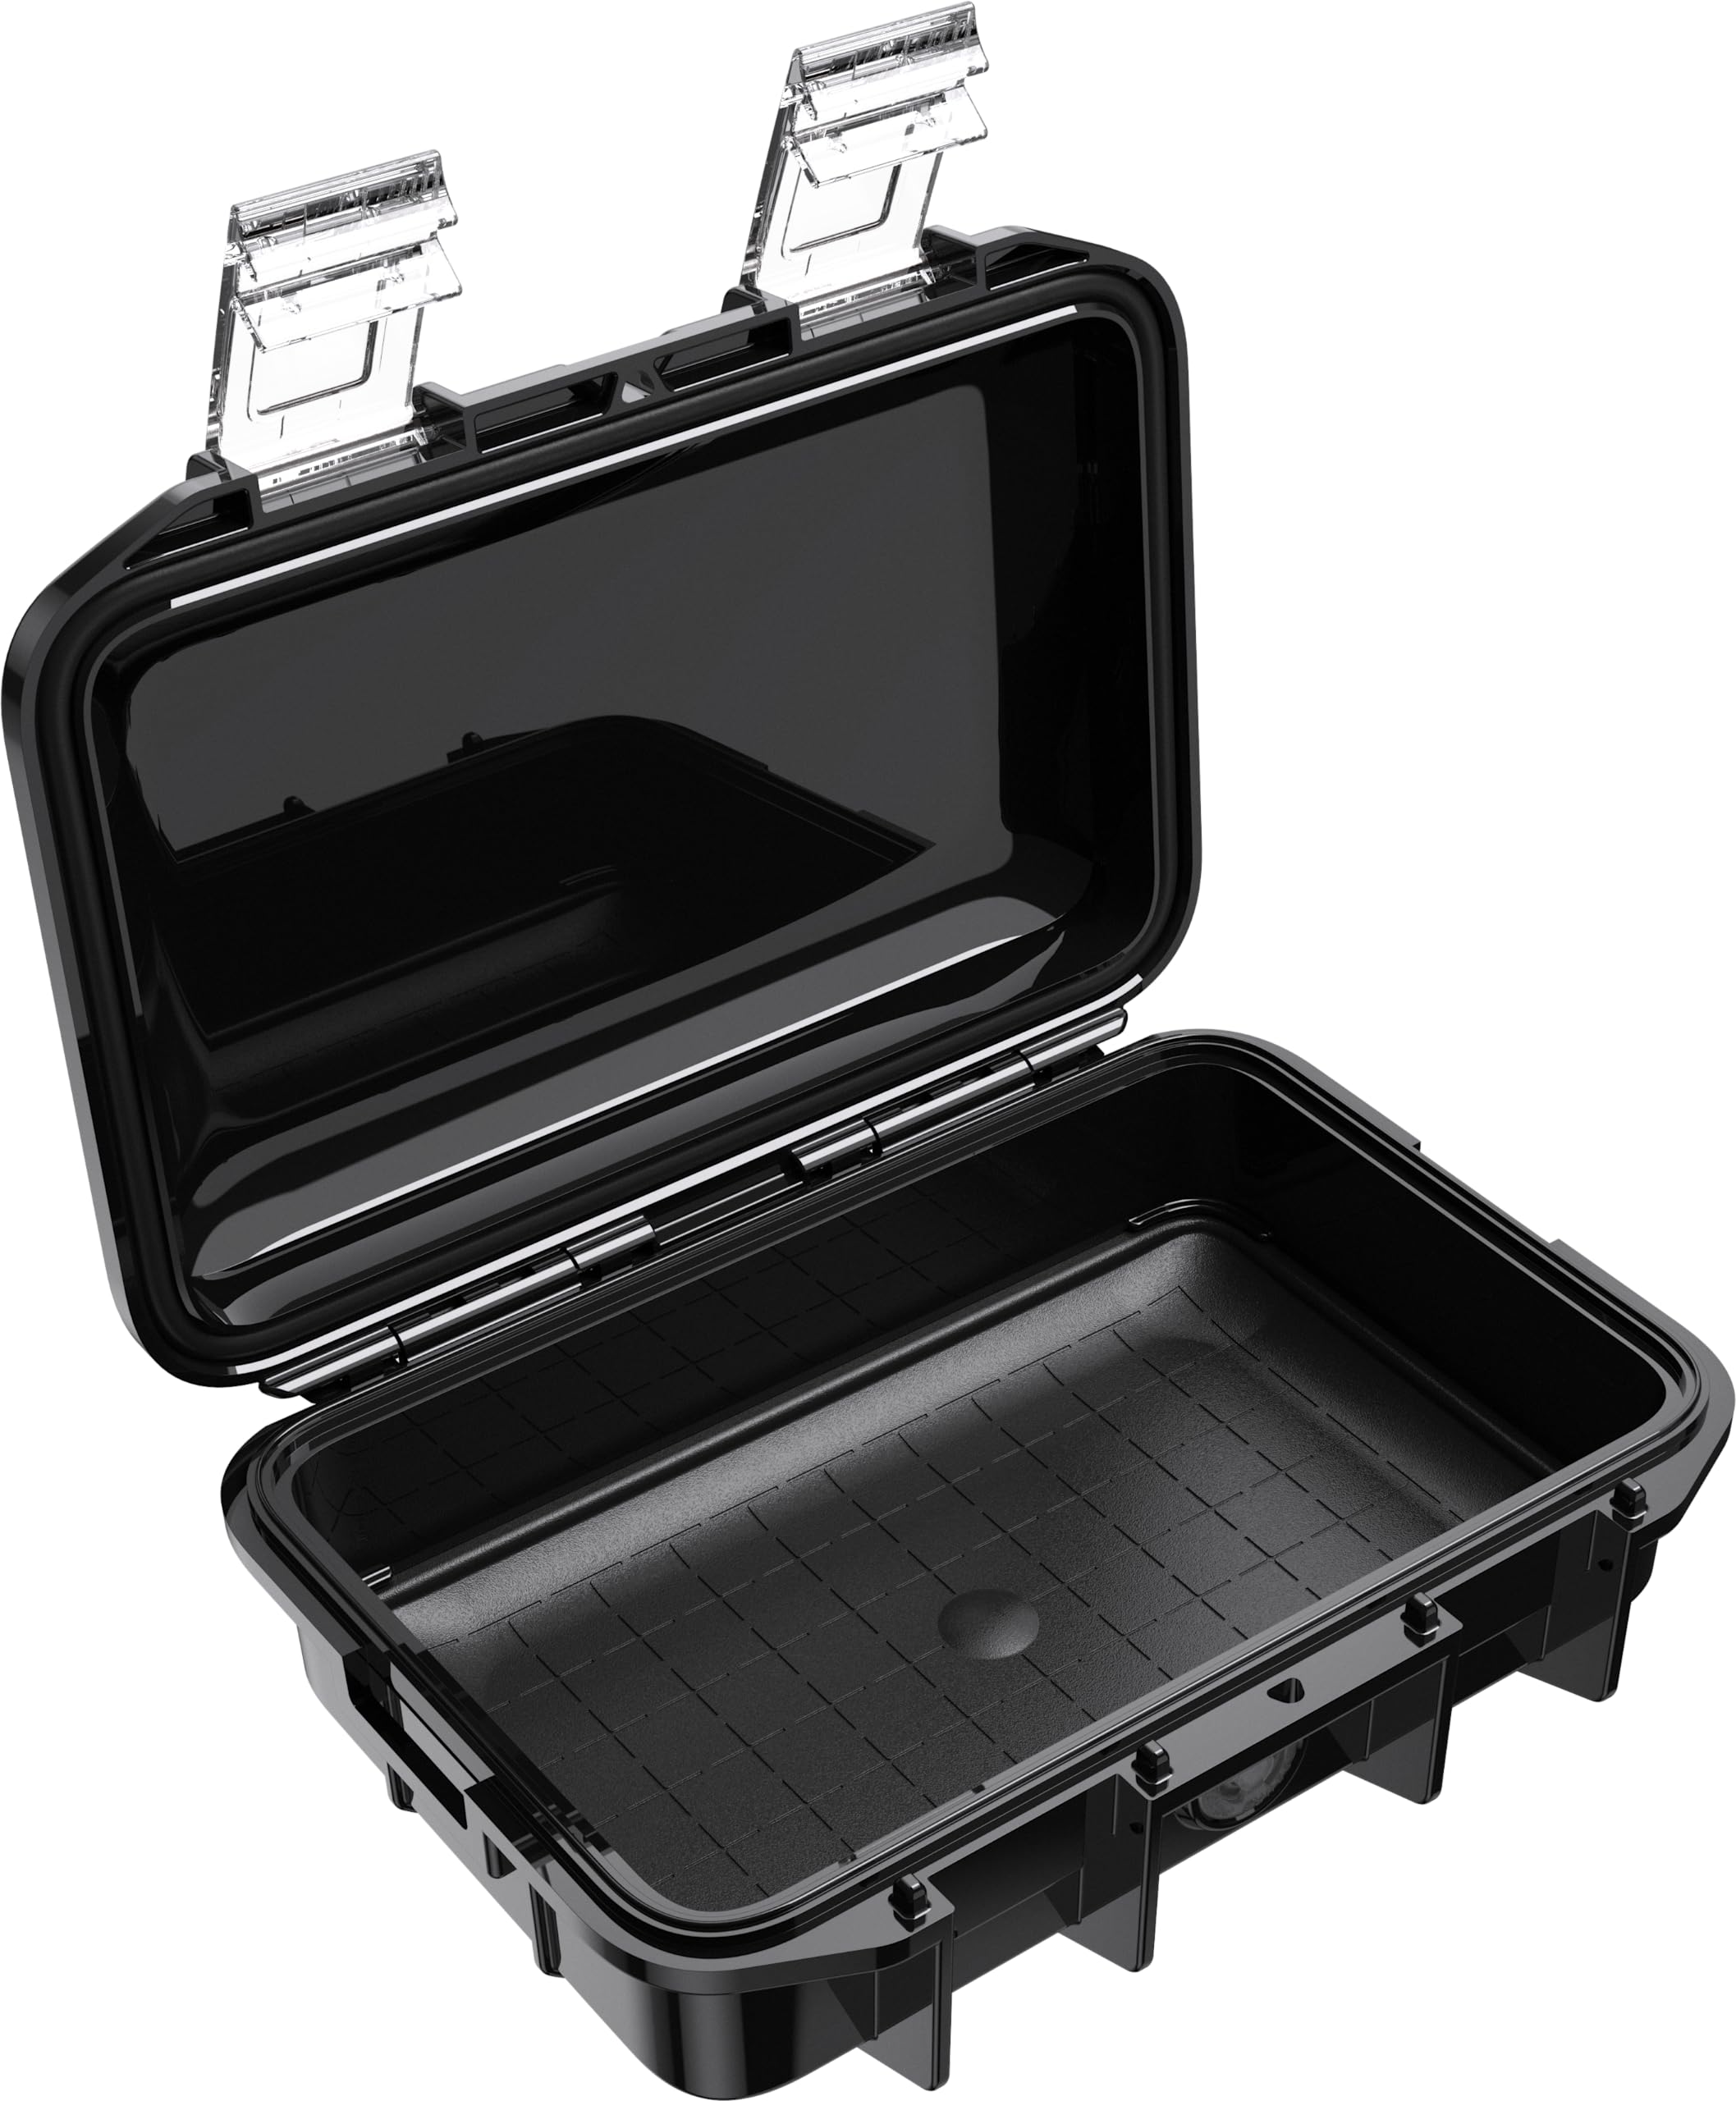 Pelican M40 Micro Case - Waterproof Case (Dry Box, Field Box) for iPhone, GoPro, Camera, Camping, Fishing, Hiking, Kayak, Beach and More (Black)